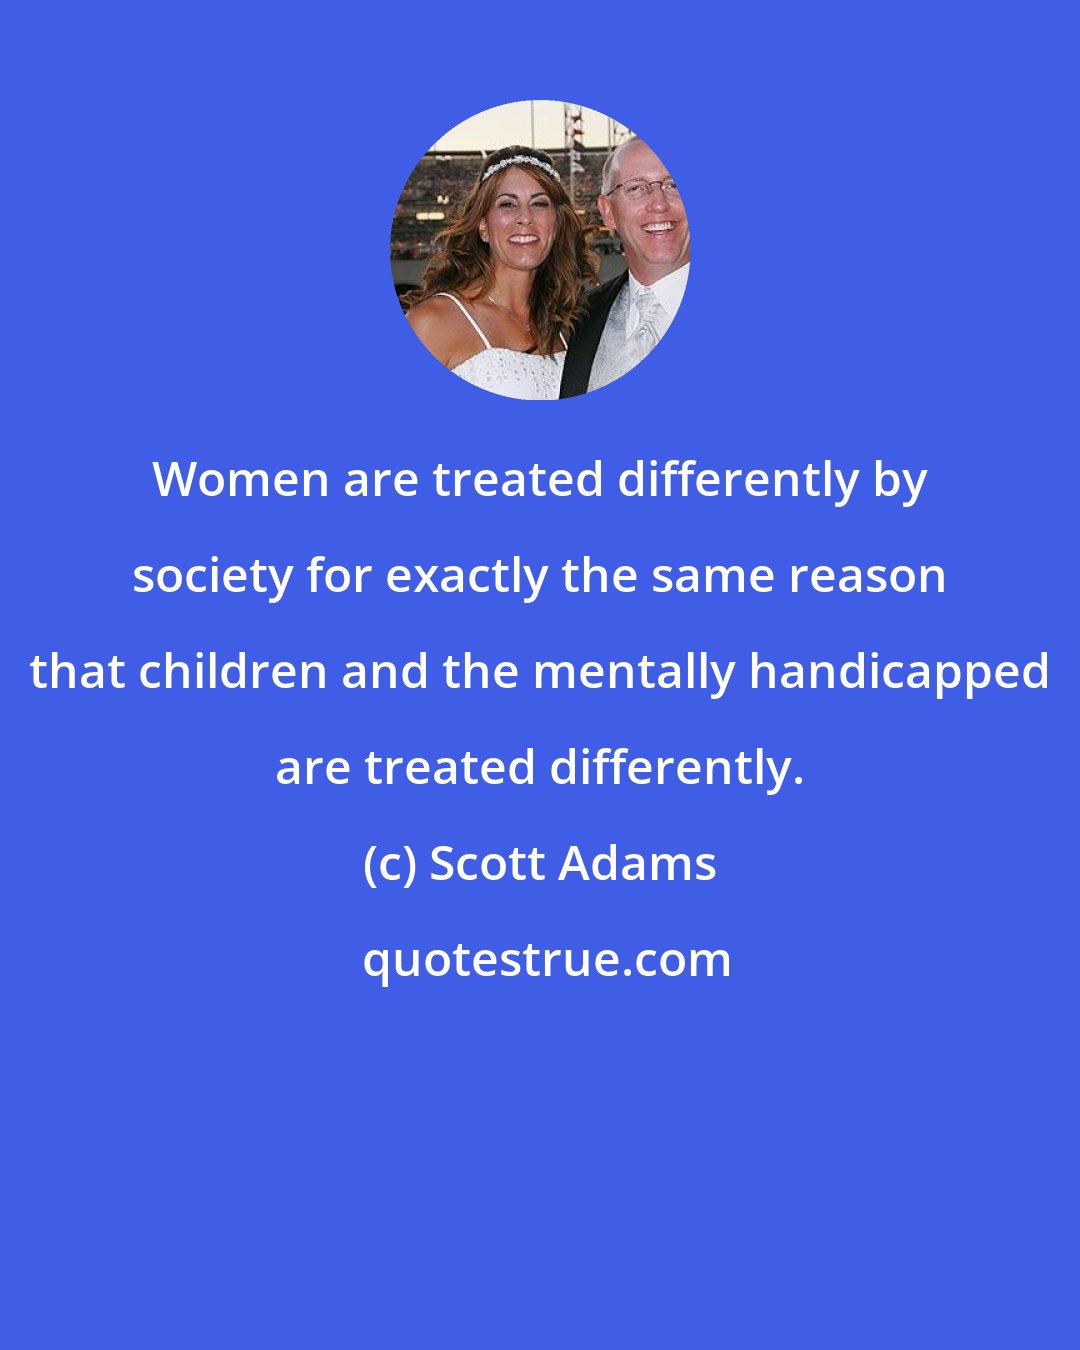 Scott Adams: Women are treated differently by society for exactly the same reason that children and the mentally handicapped are treated differently.